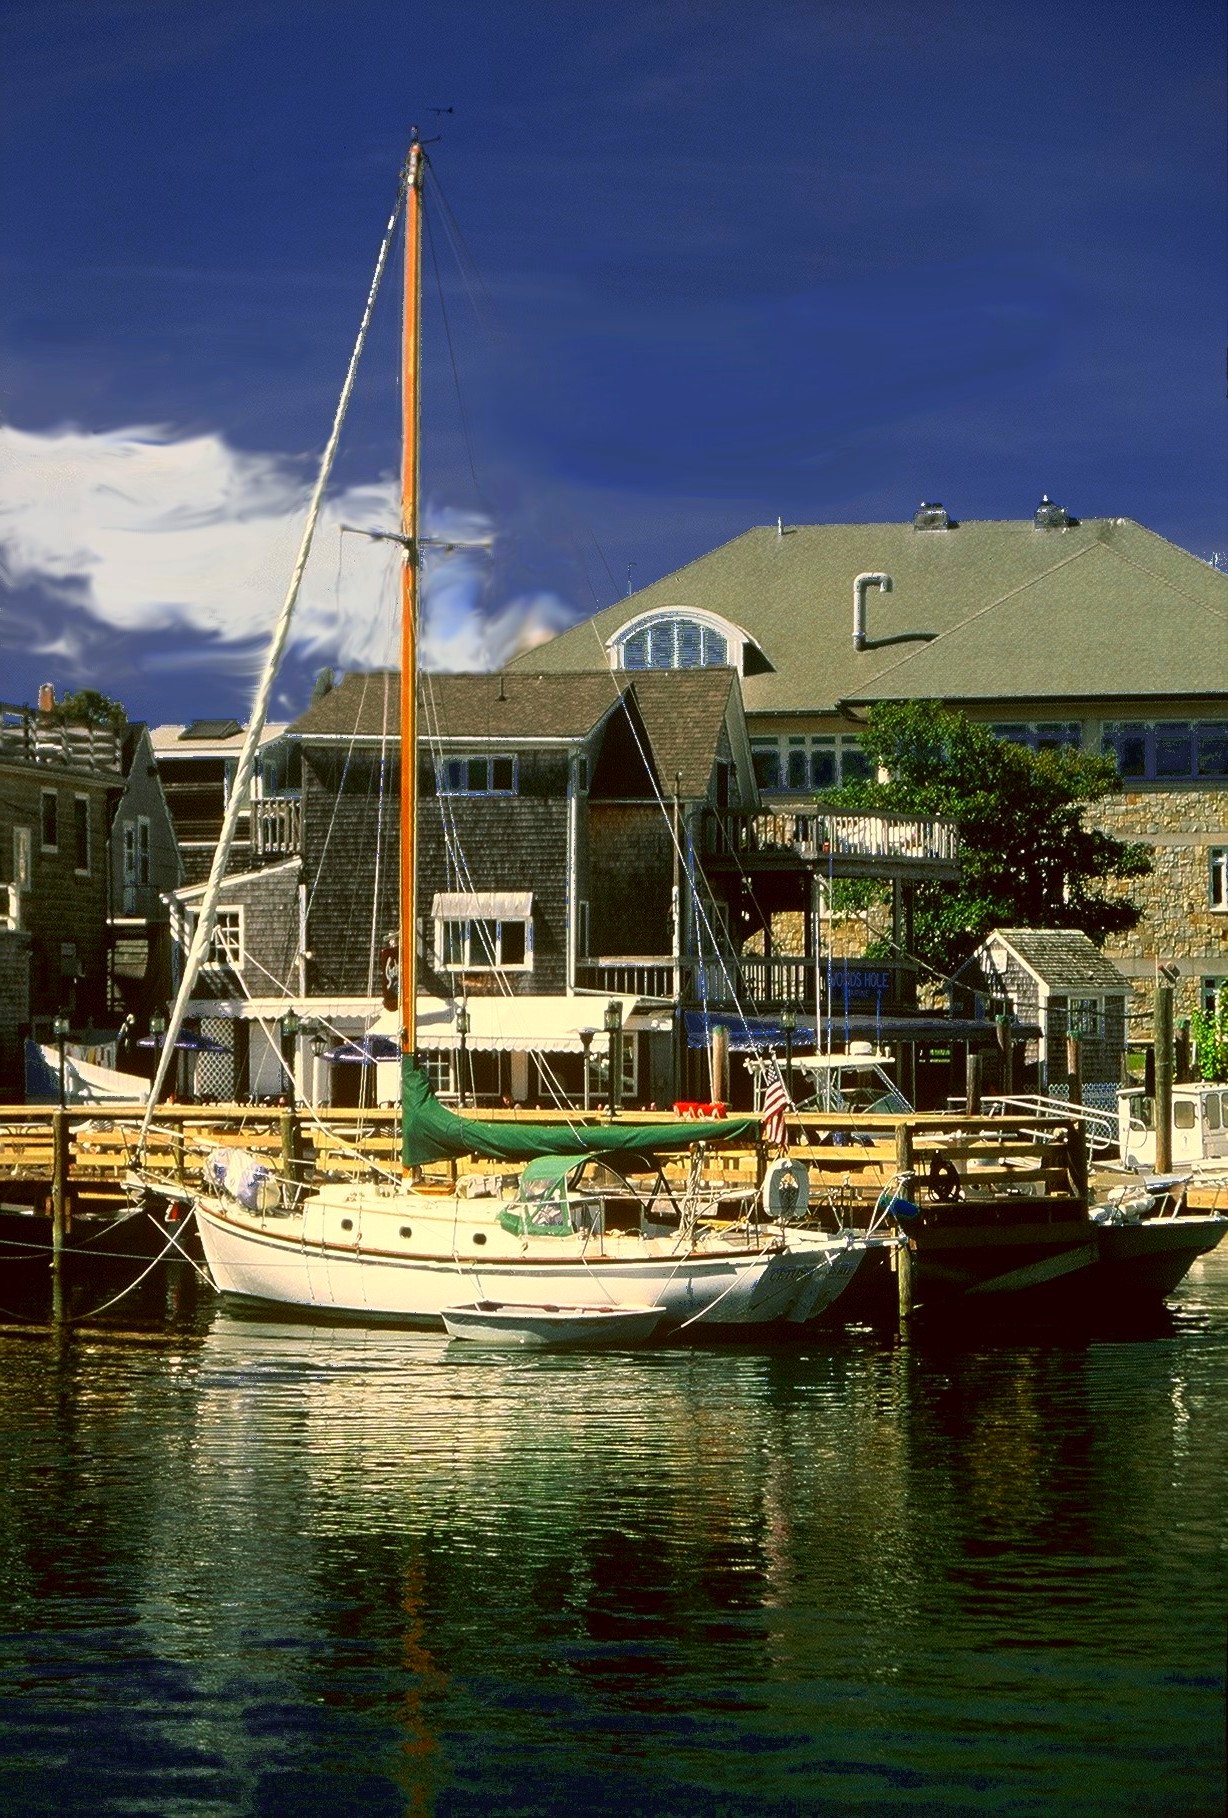 Sailboat at Woods Hole (user submitted)